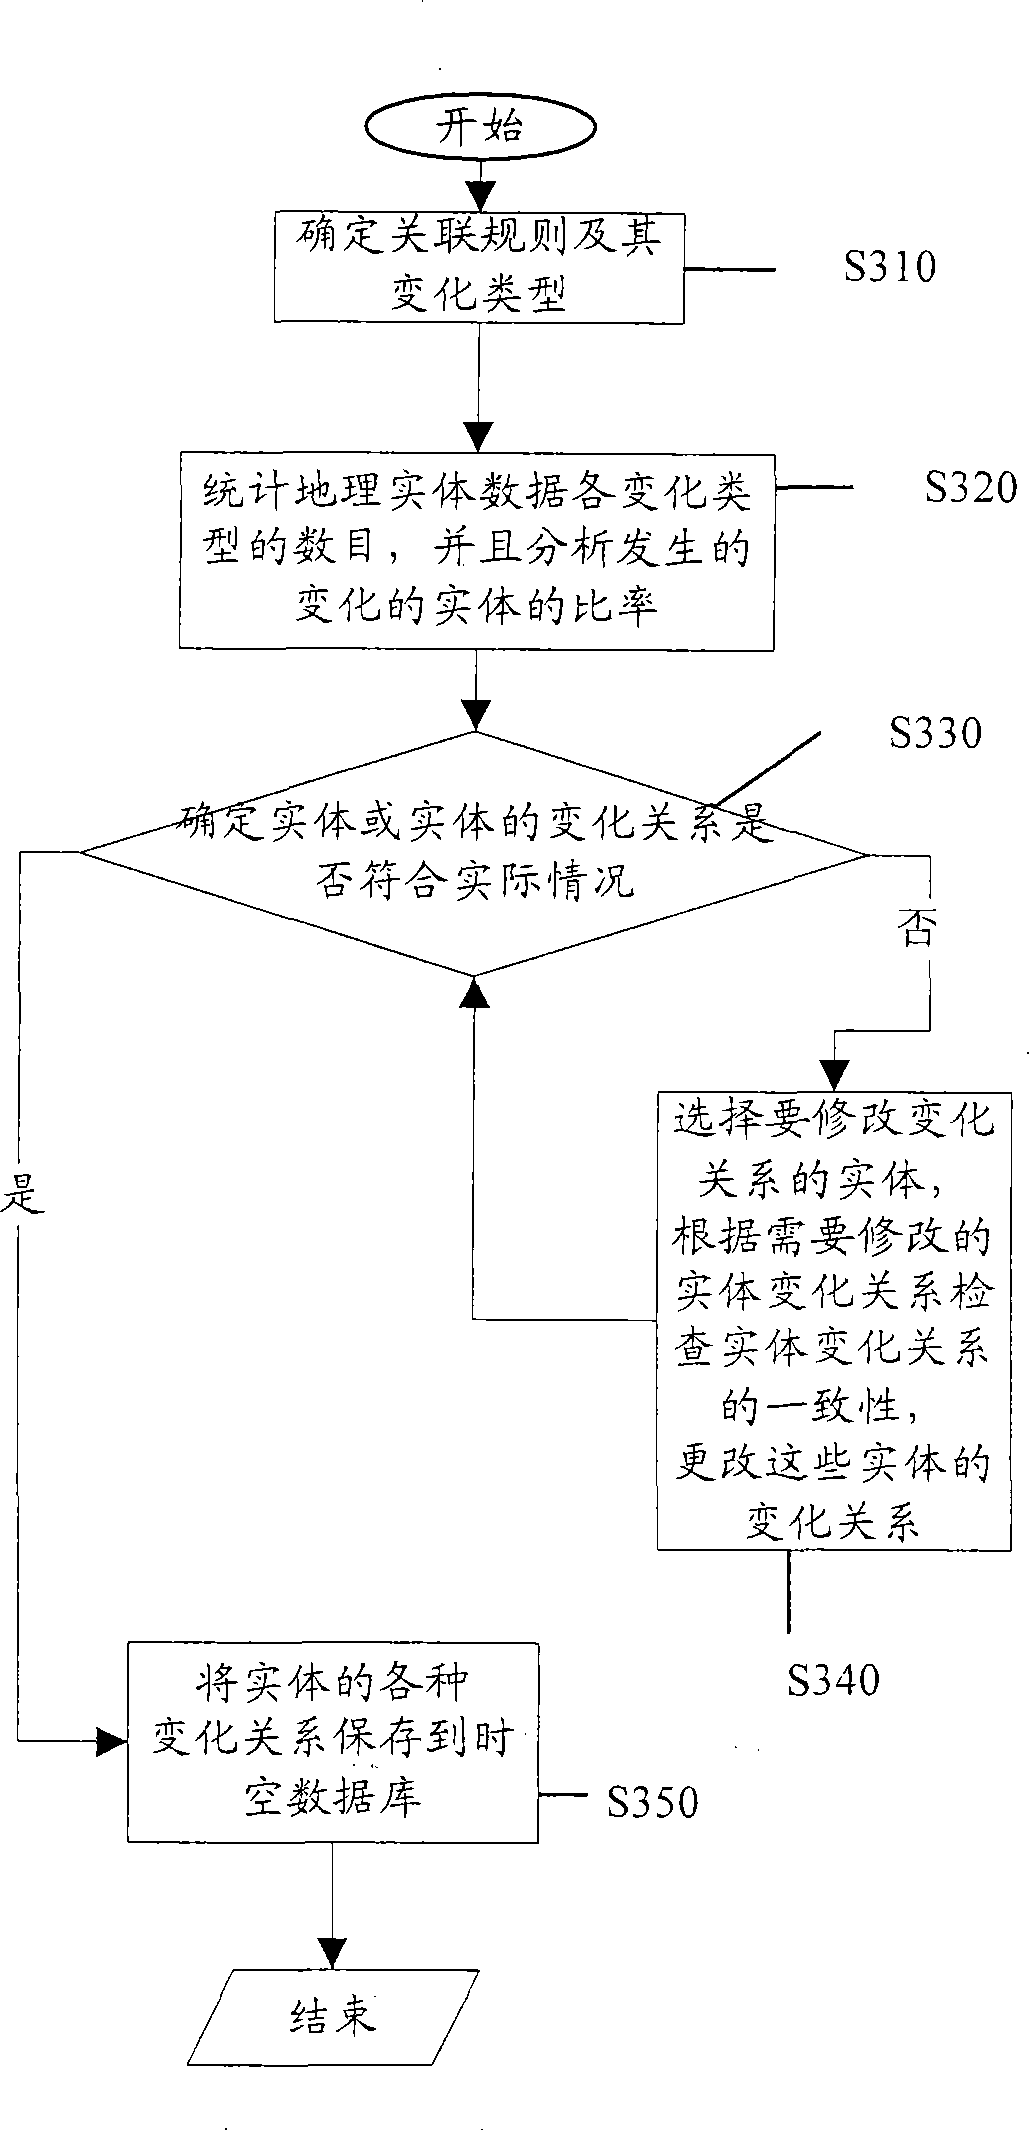 Space-time database administration method and system